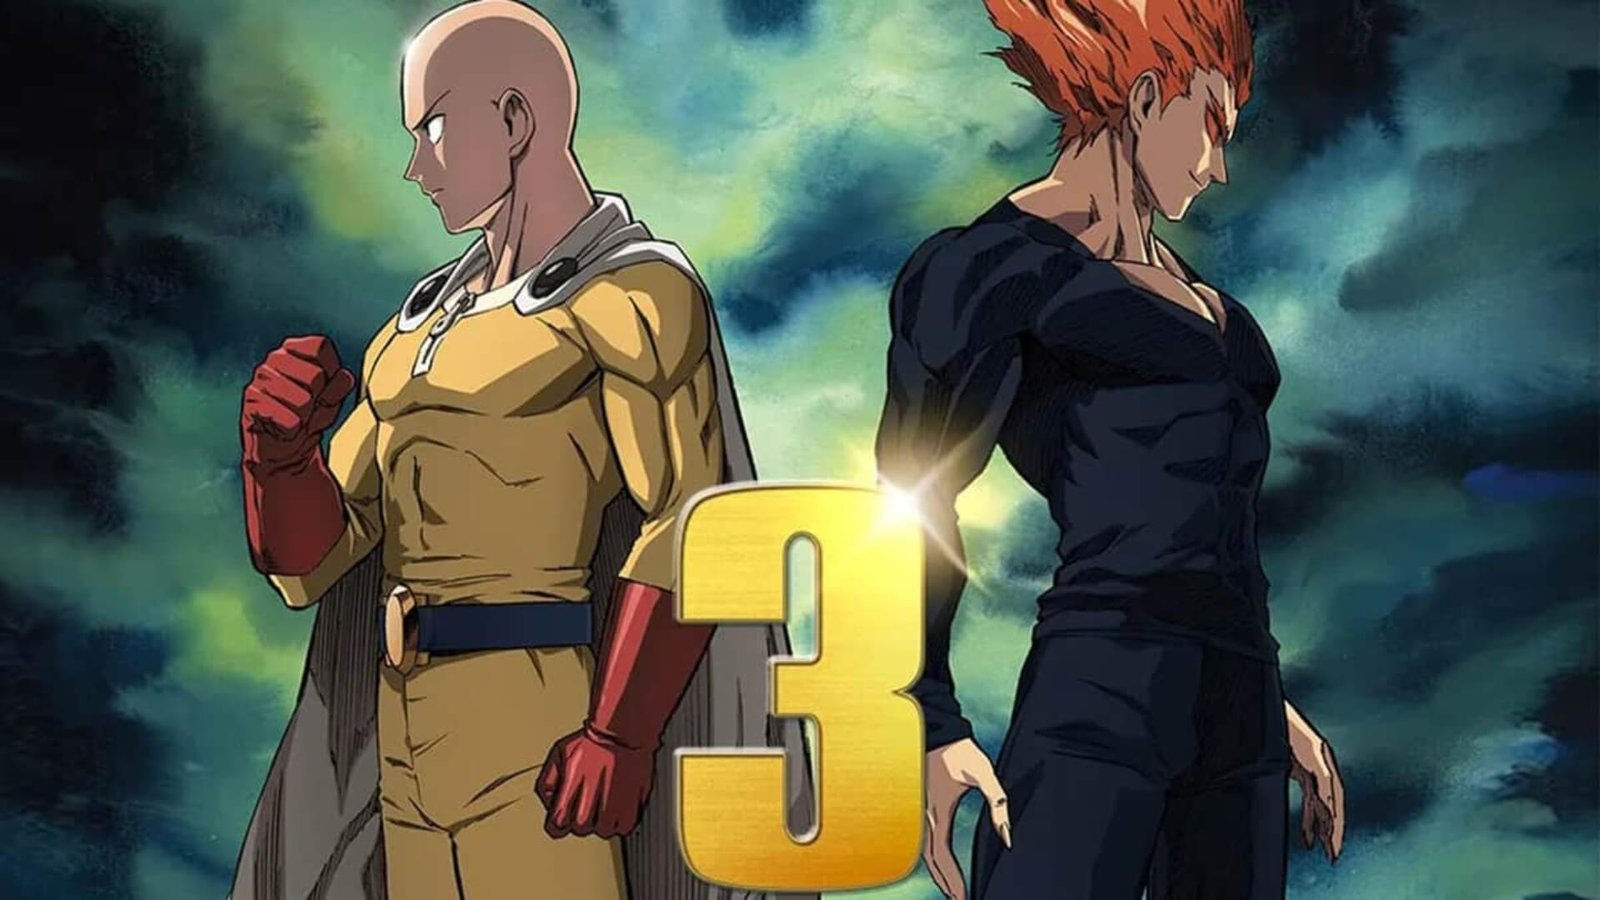 One Punch Man Season 3 Announcement just dropped and it looks outstanding!